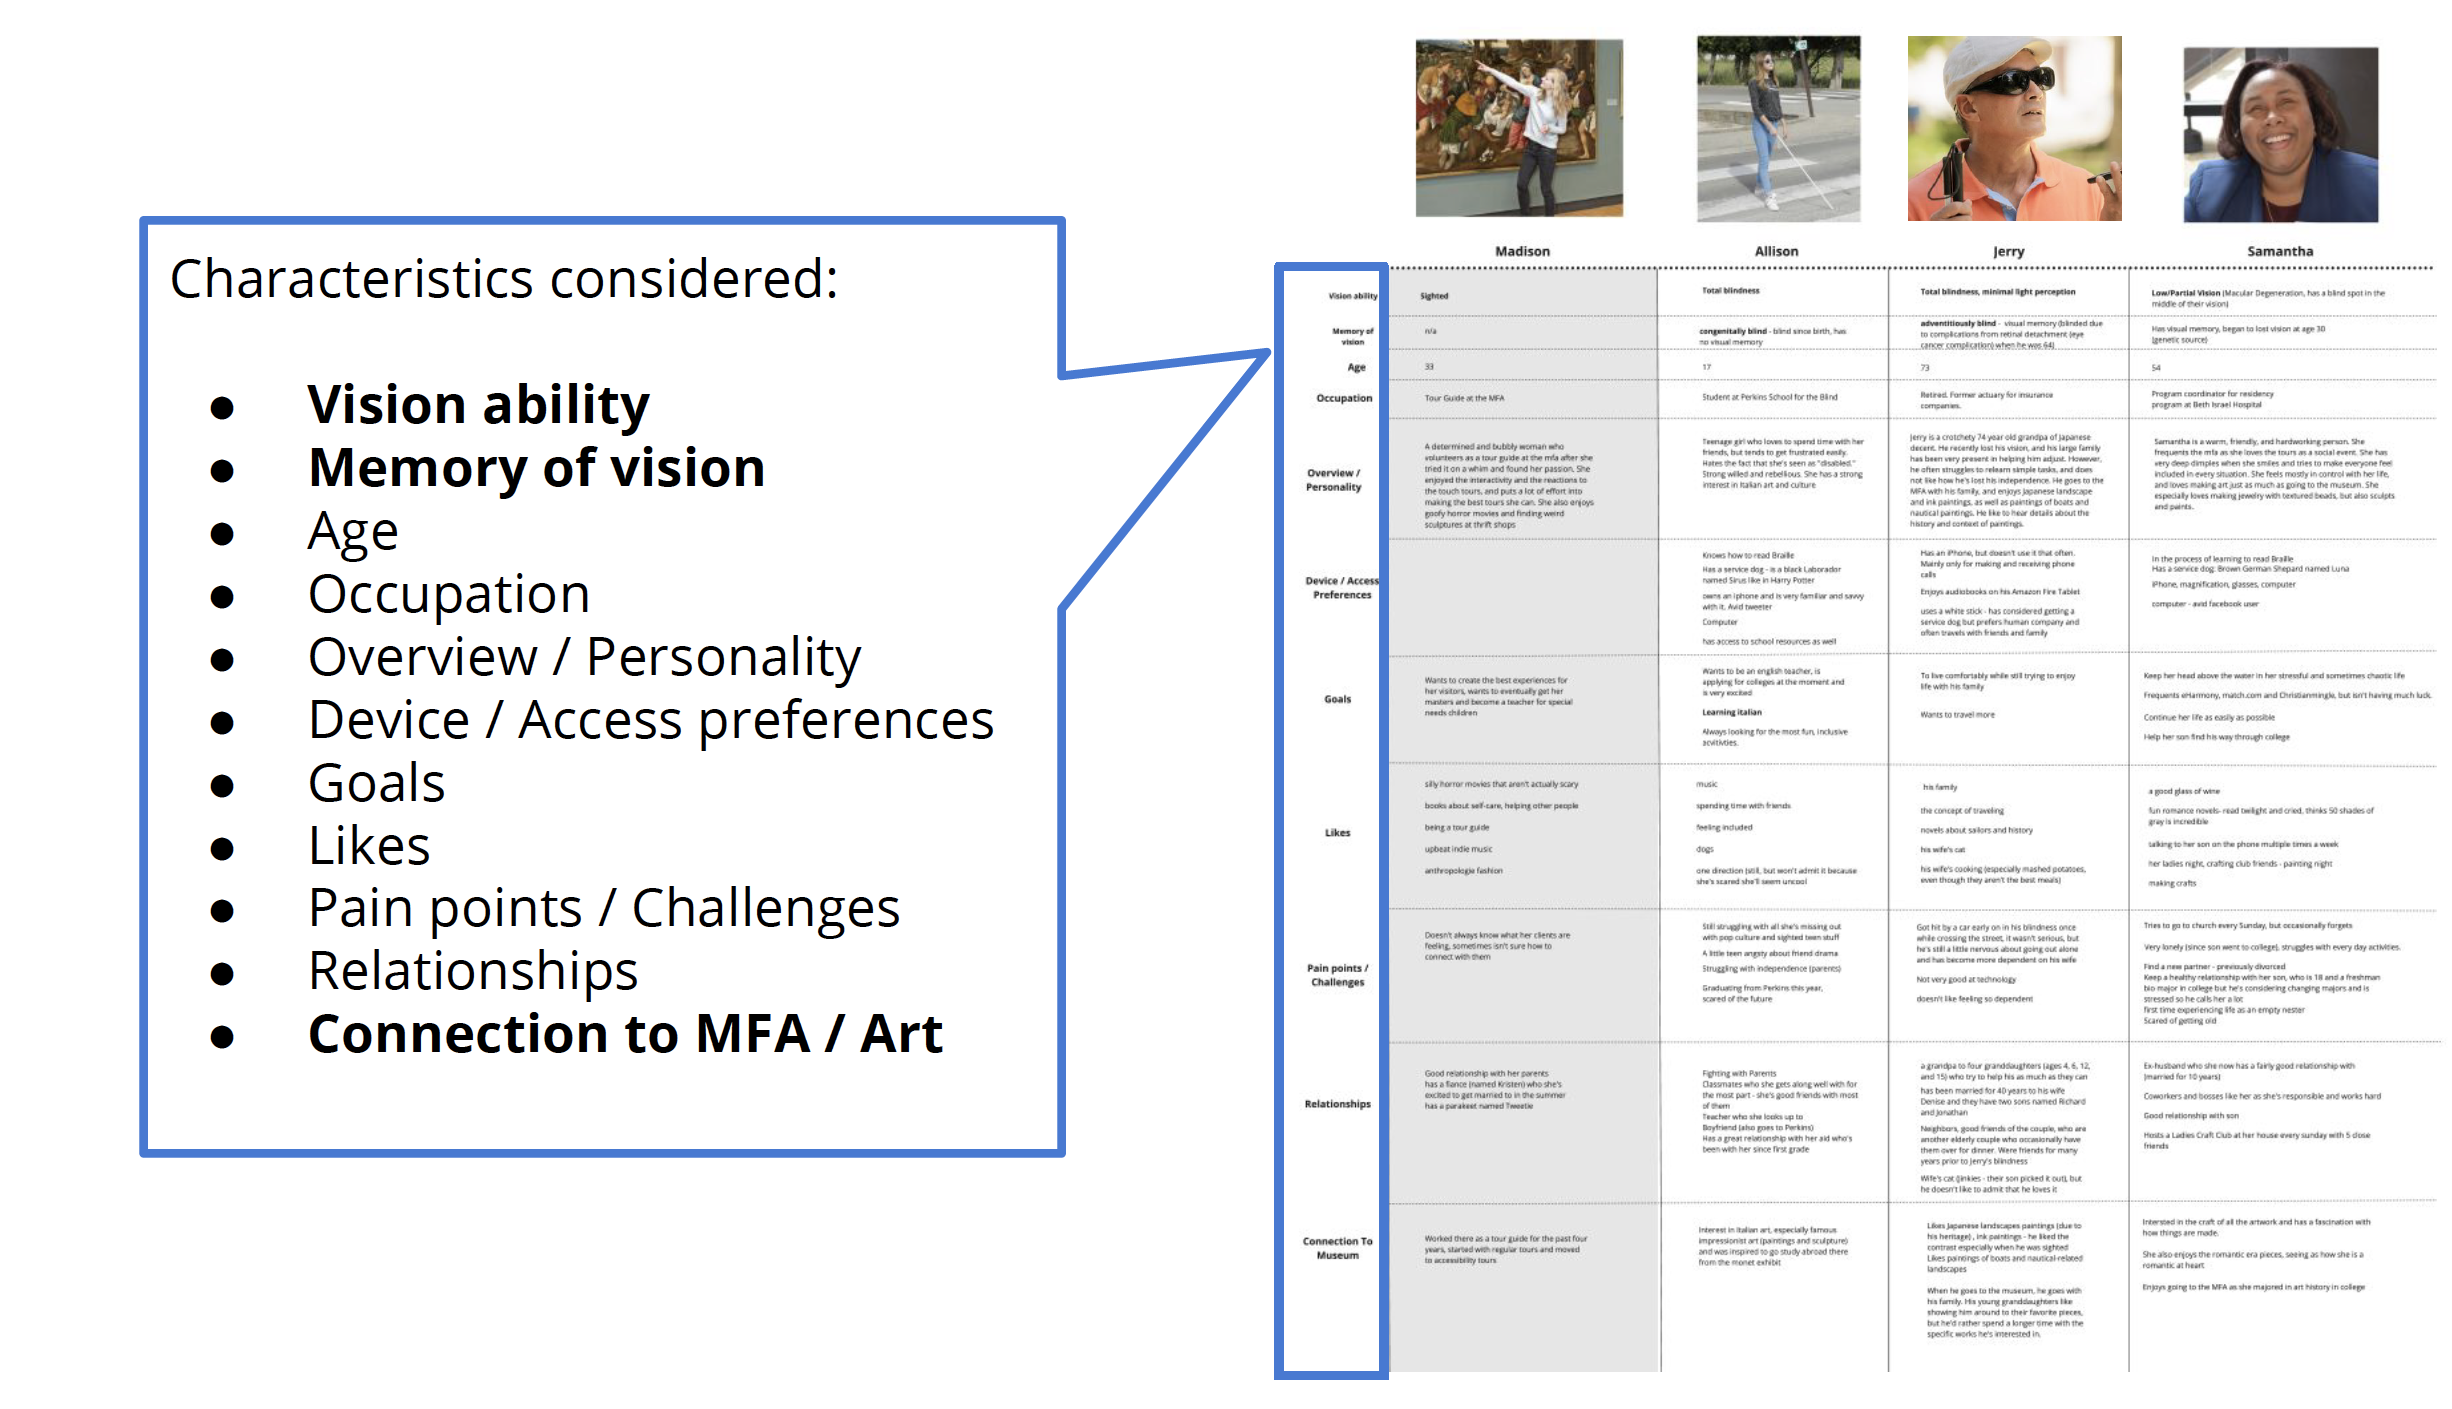 Chart with the Four personas and details about them along with the characteristics specifically considered for the project (vision ability, memory of vision, connection to art, etc.)